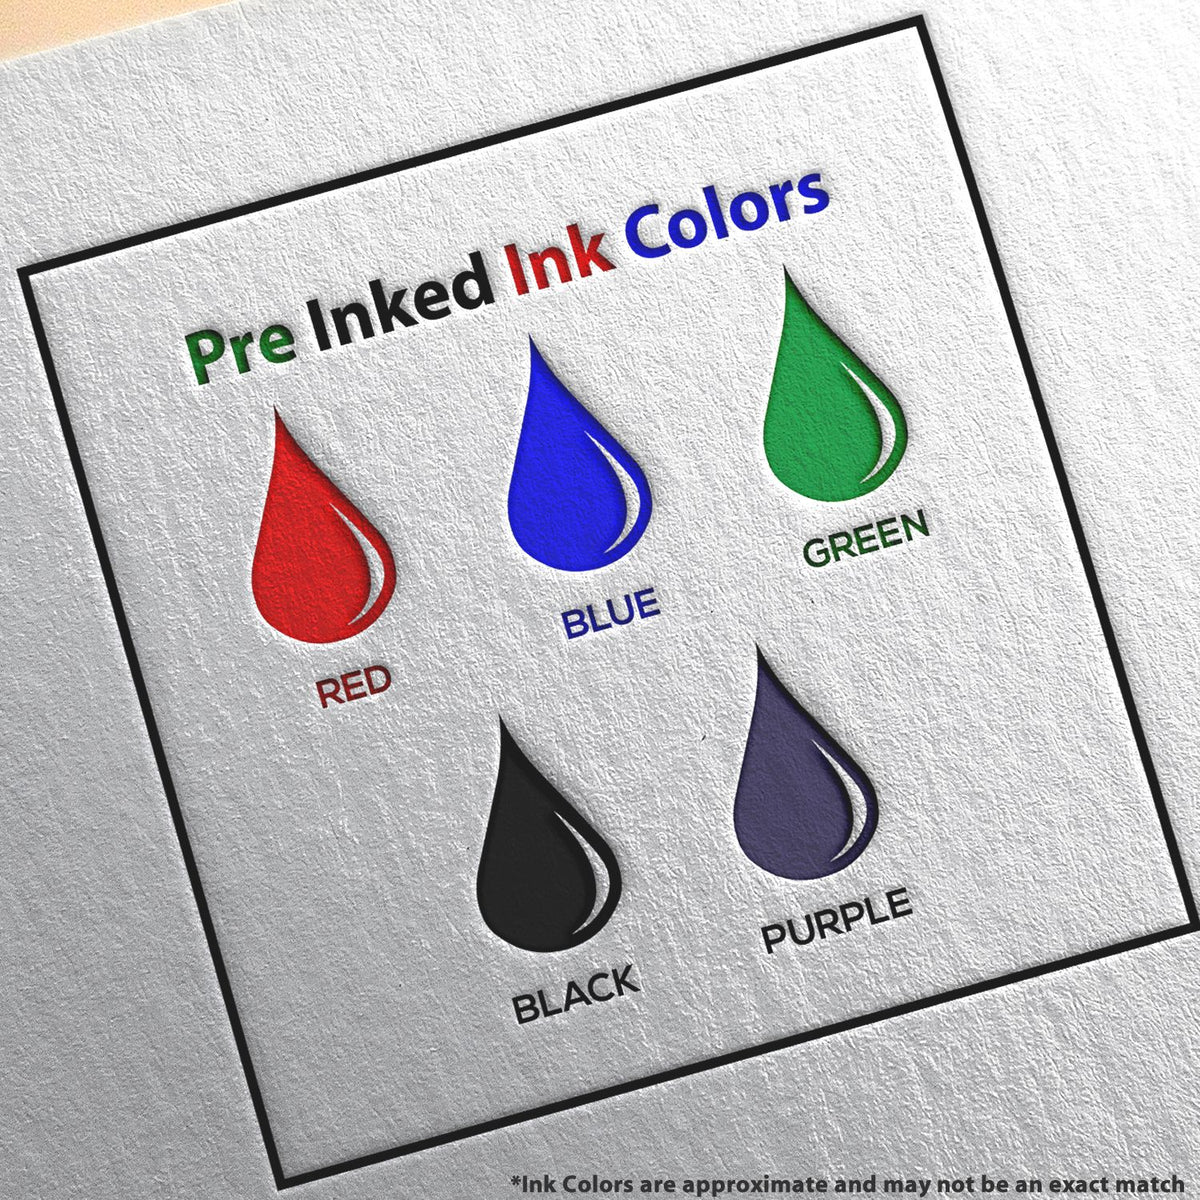 A picture showing the different ink colors or hues available for the Premium MaxLight Pre-Inked Ohio Engineering Stamp product.